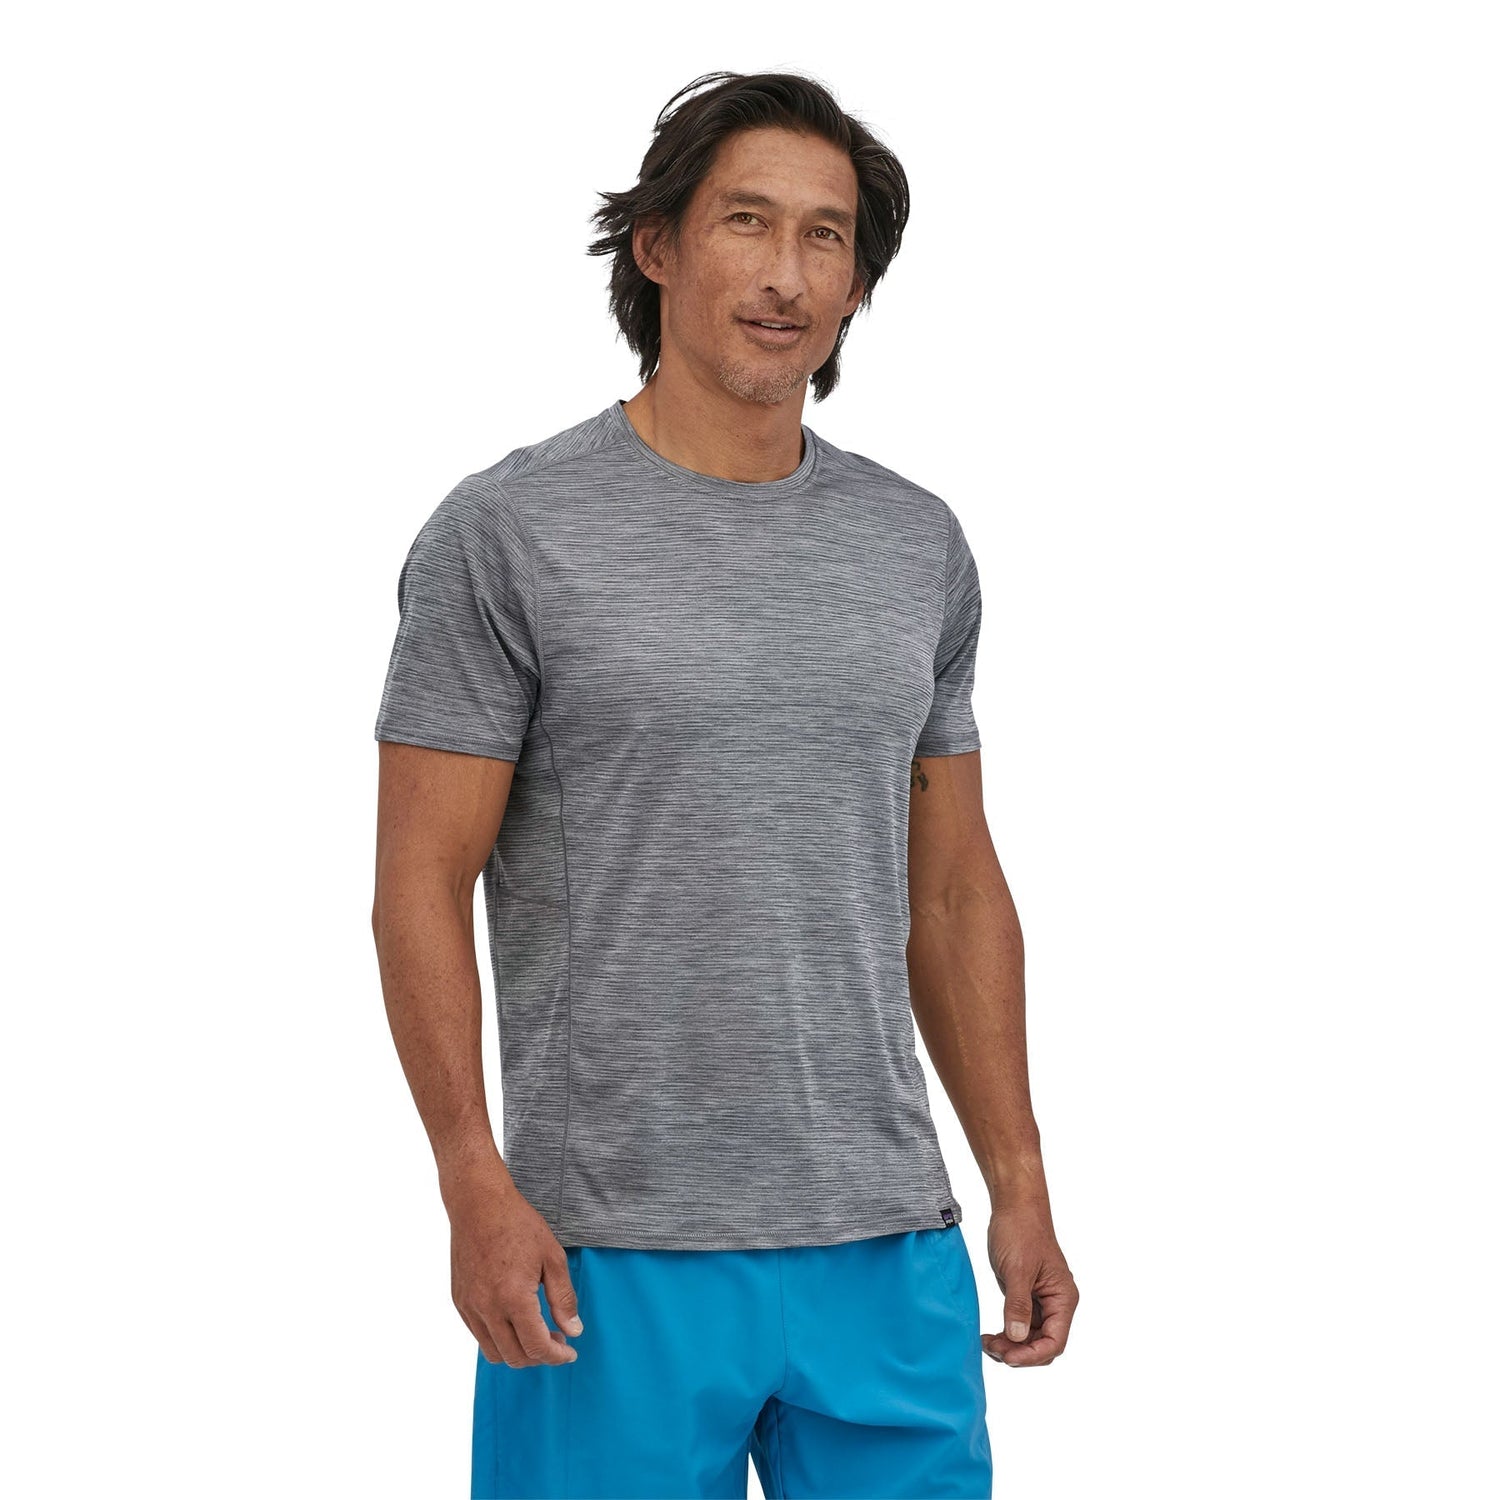 Patagonia M's Cap Cool Lightweight Shirt - Recycled Polyester Forge Grey - Feather Grey X-Dye Shirt